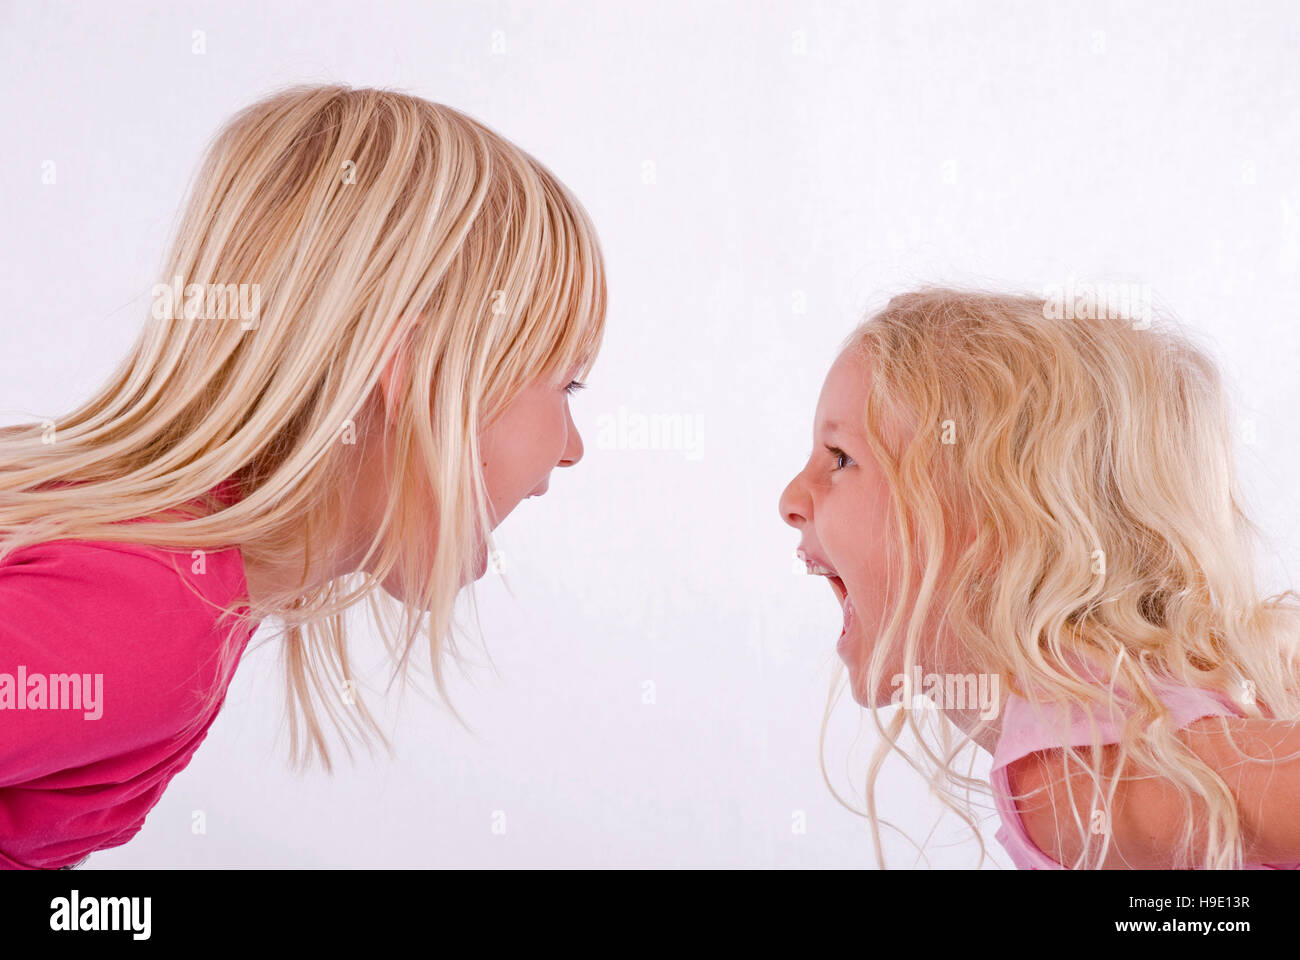 Two blonde girls screaming at each other Stock Photo